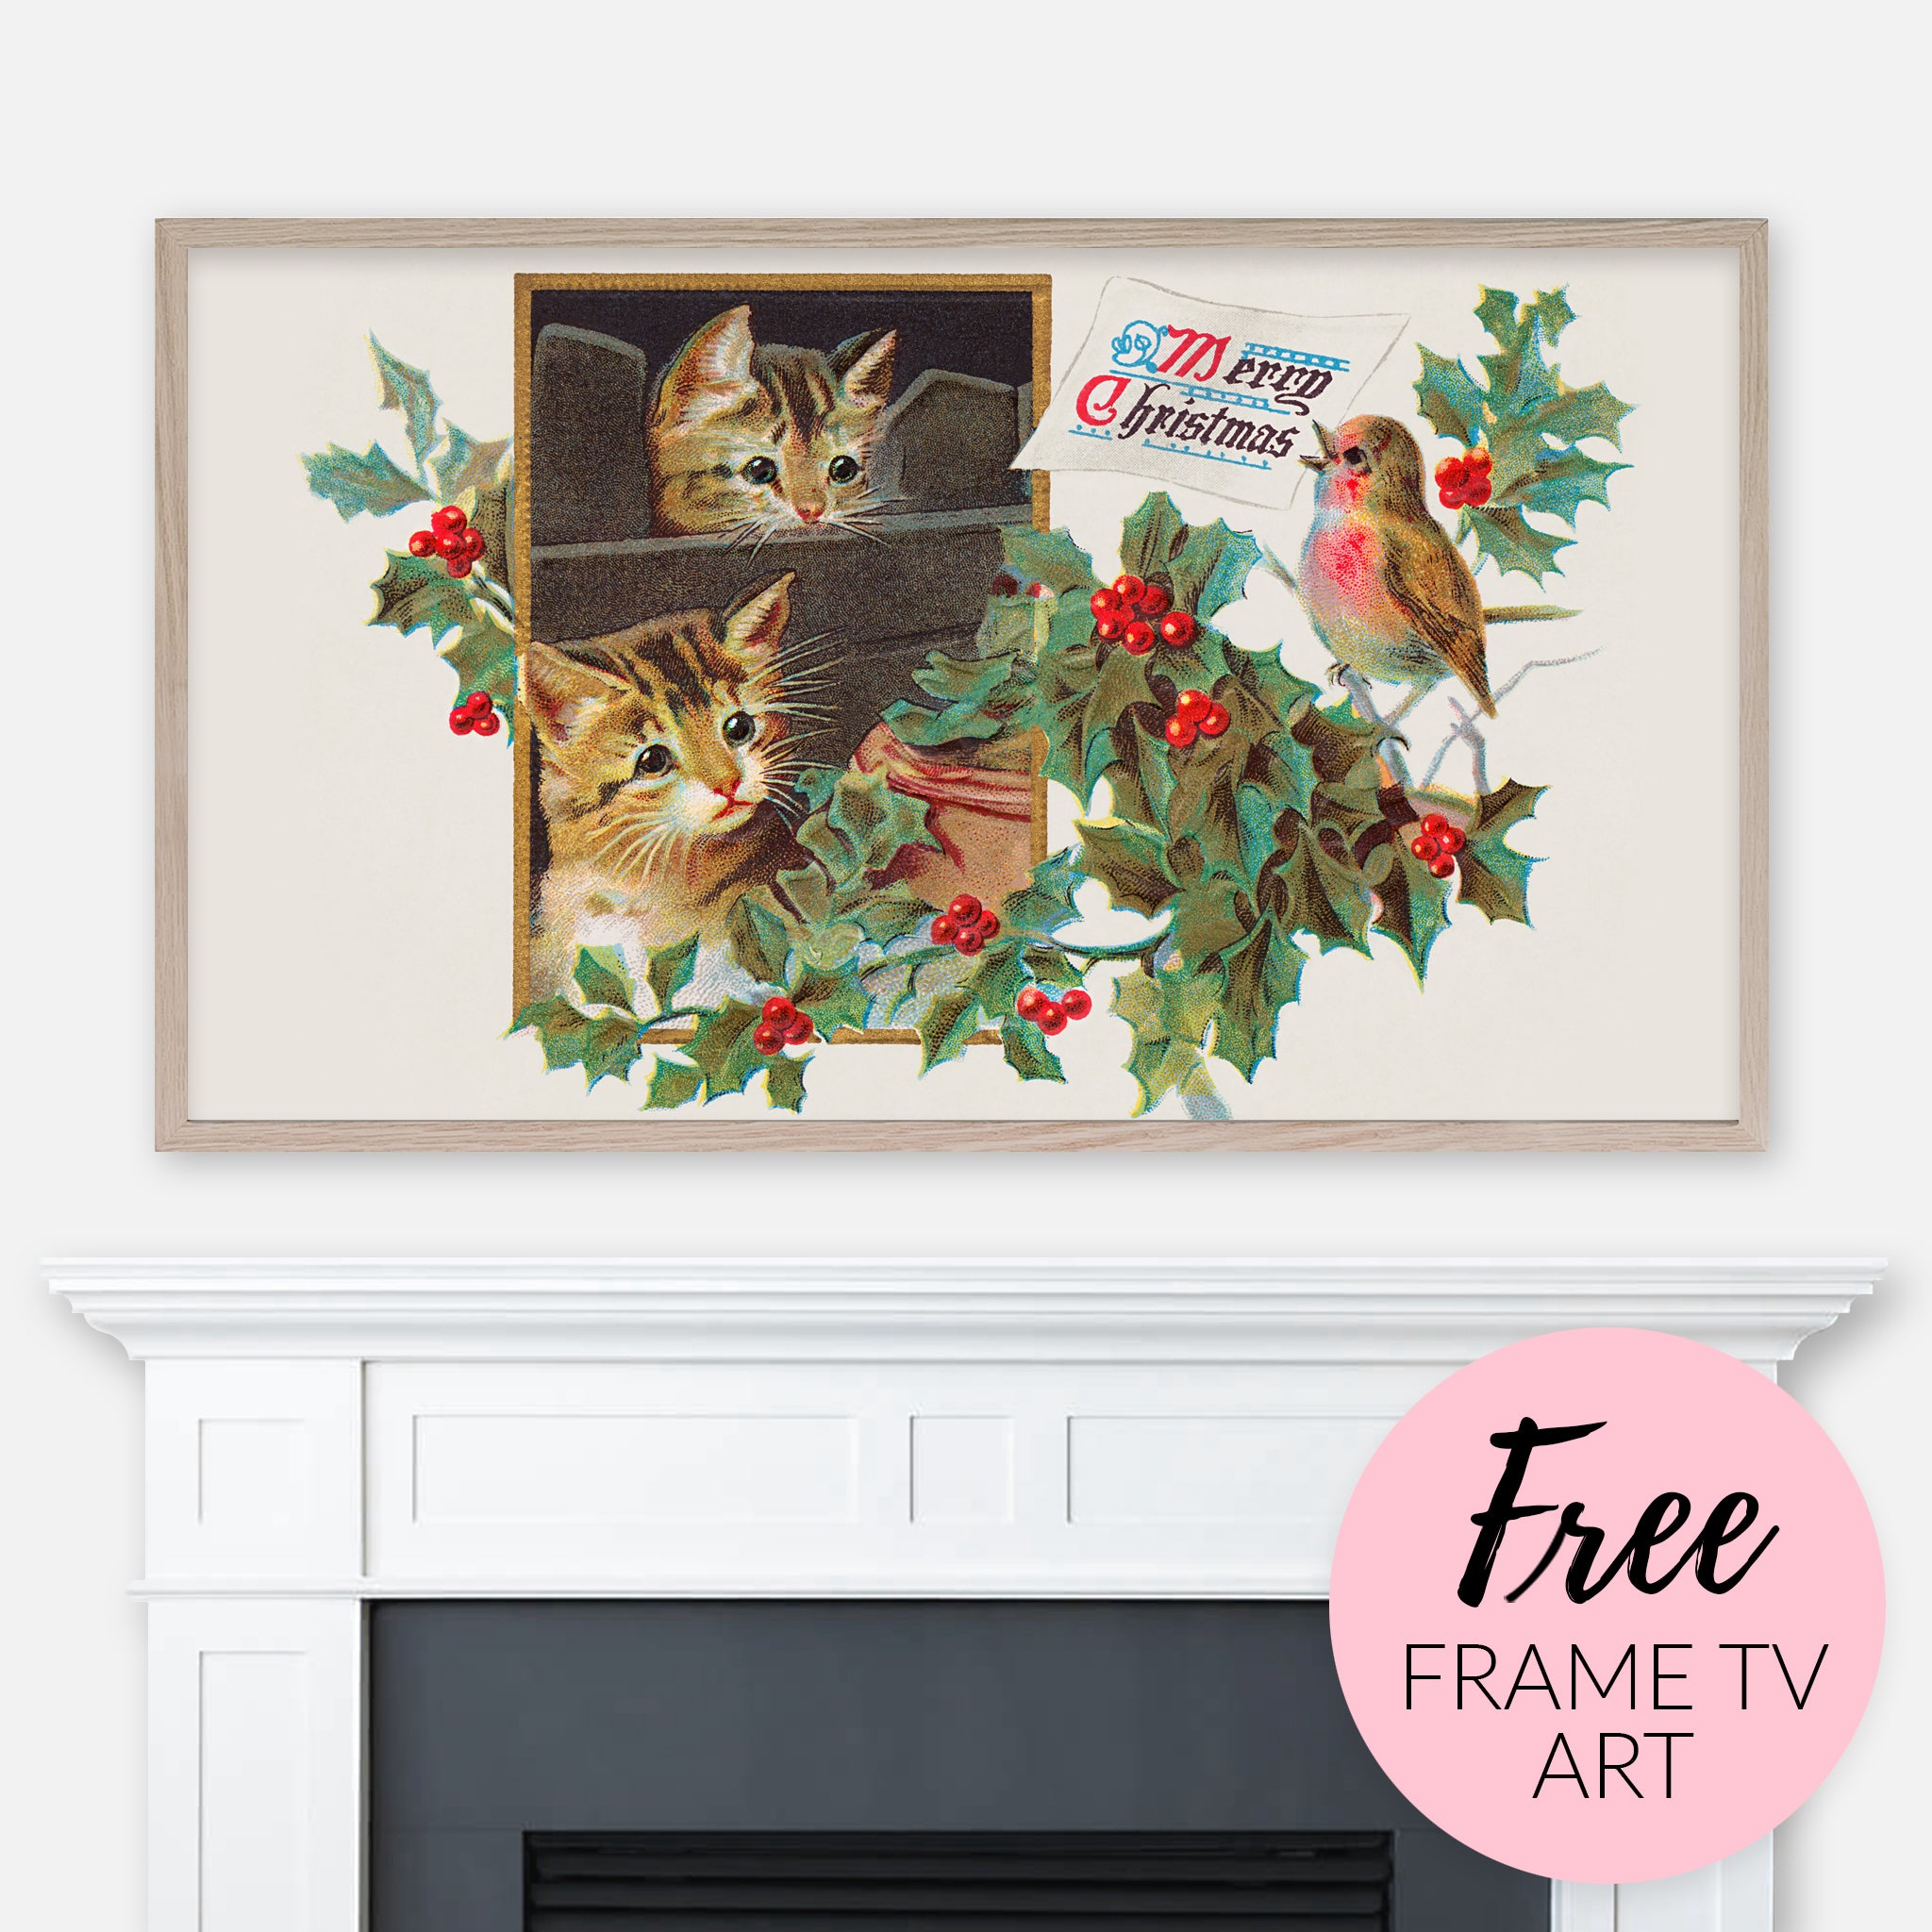 Free image for Samsung Frame TV - Vintage Christmas Illustration with kittens and a bird displayed above fireplace